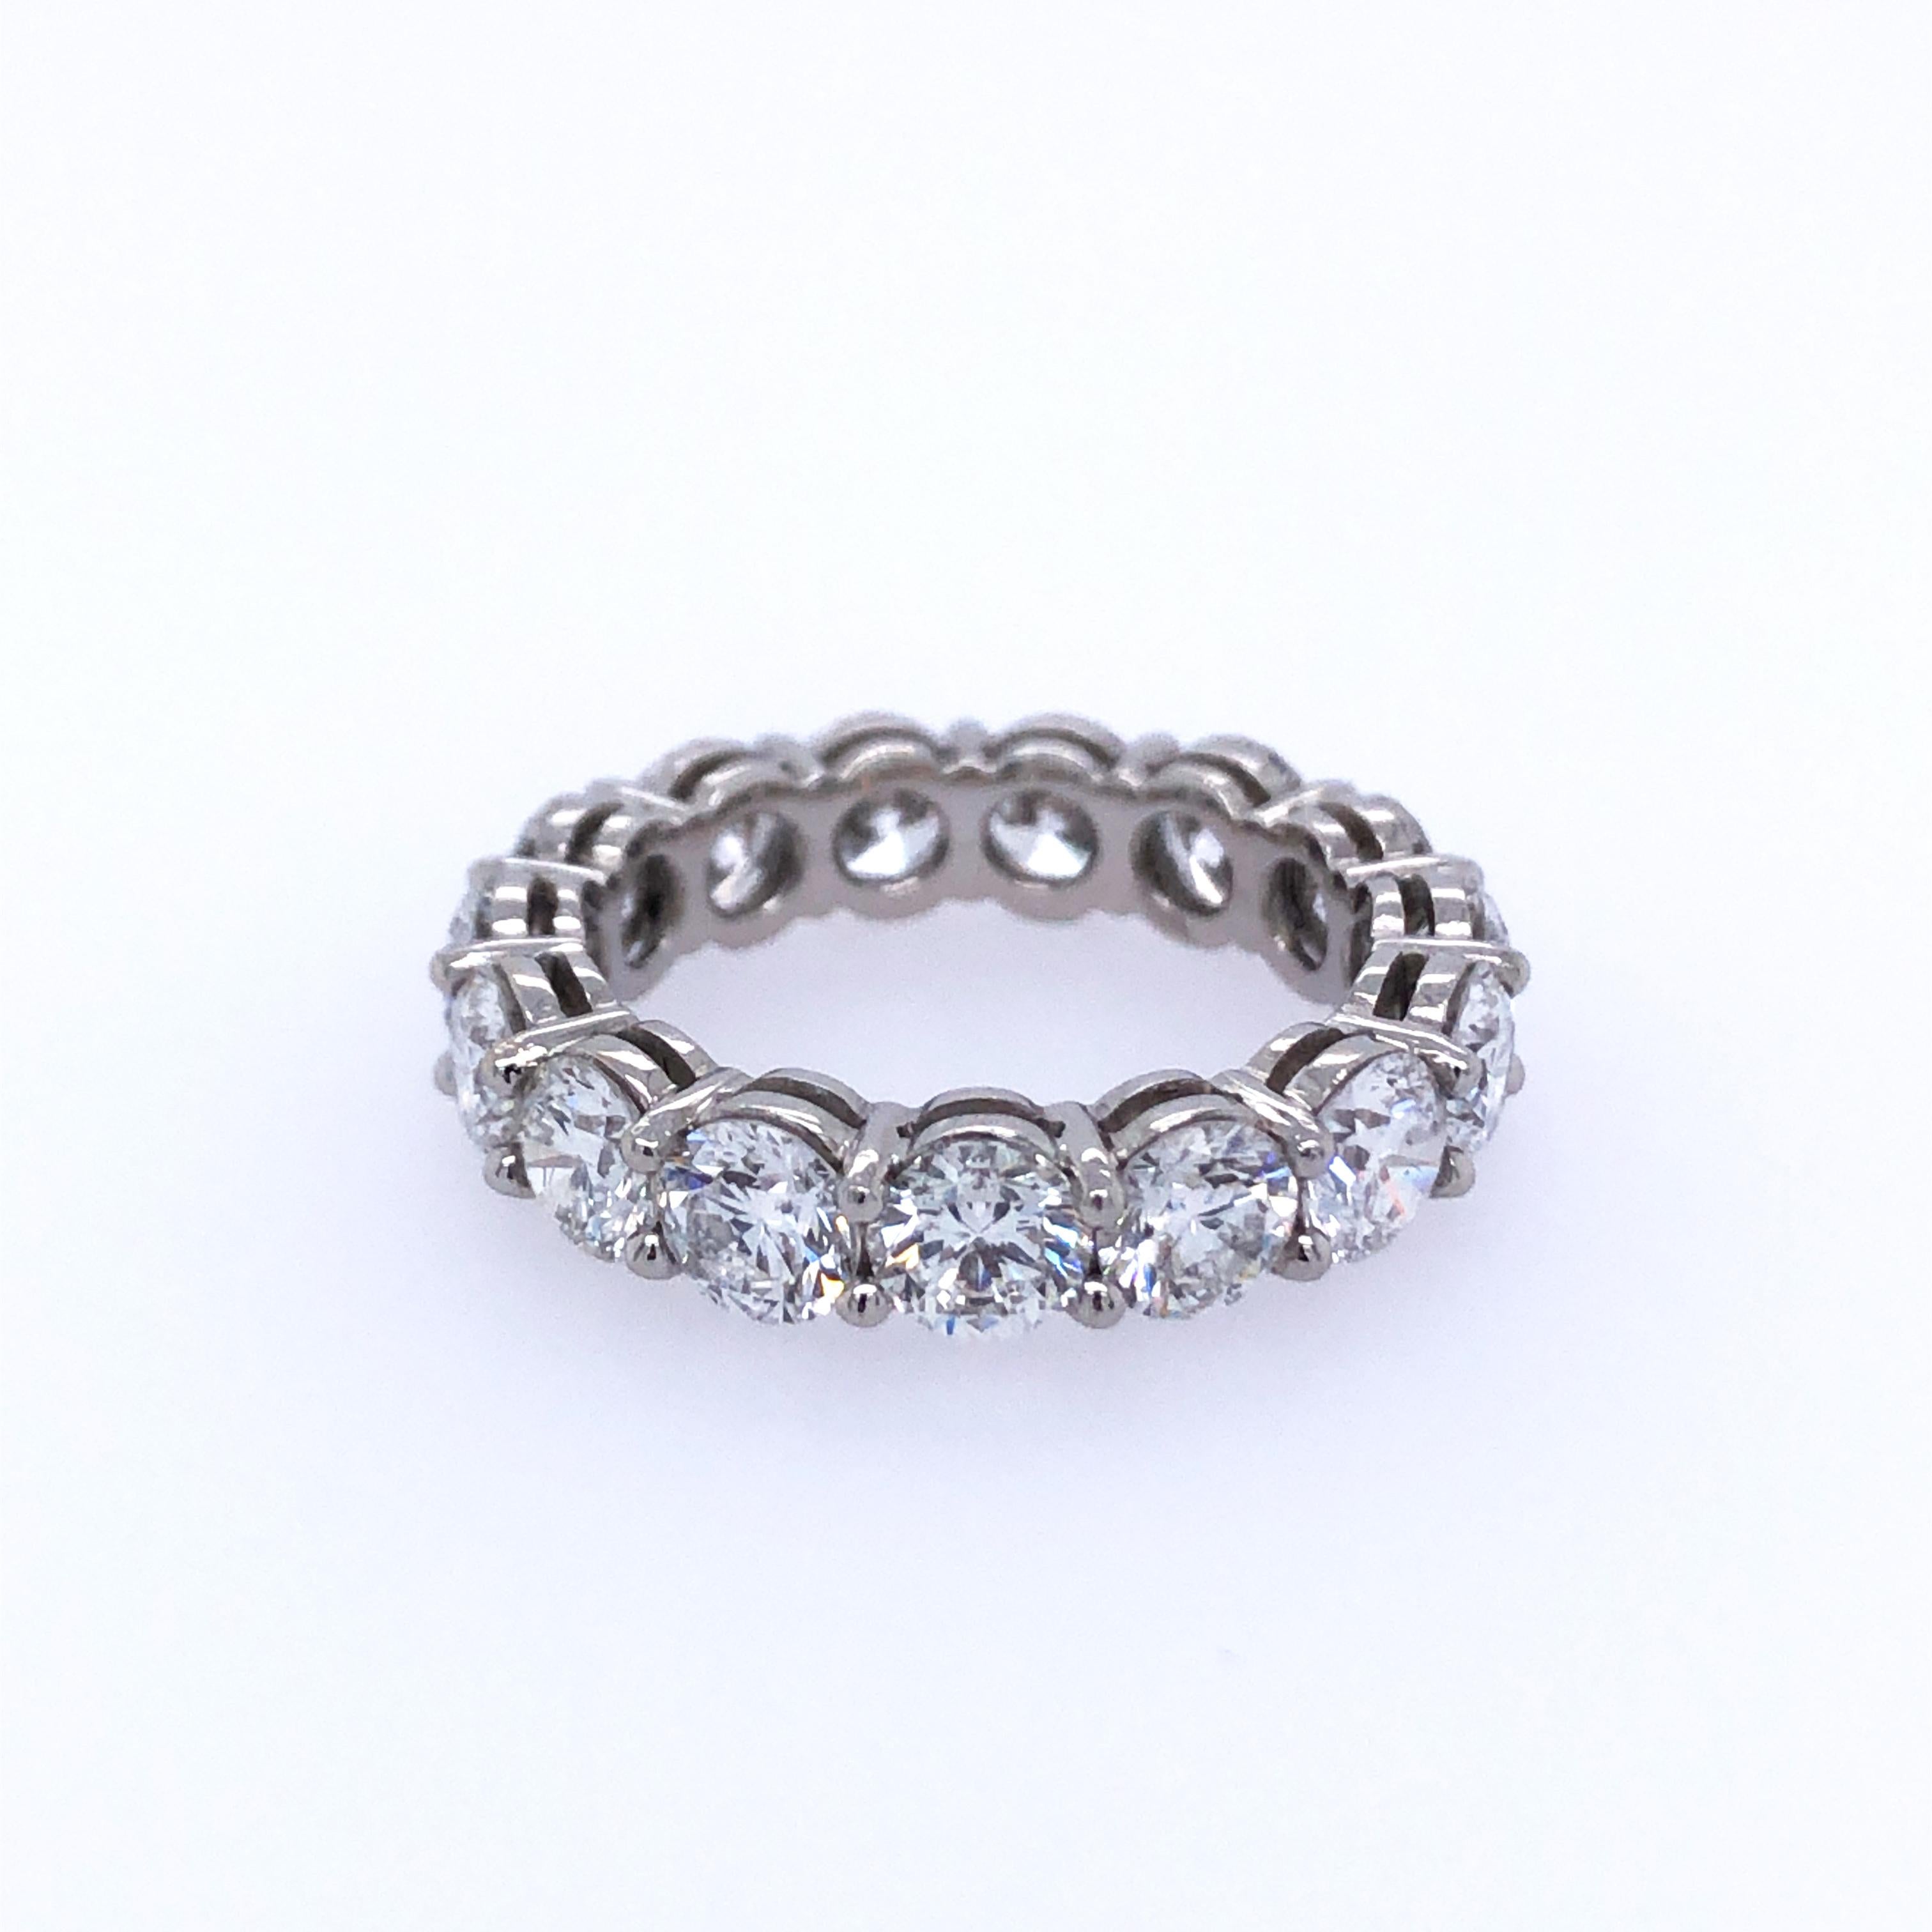 Of 15 round brilliant-cut diamonds
Platinum Ring size 4 ½; Gross weight 5.0 g 3.2 dwts